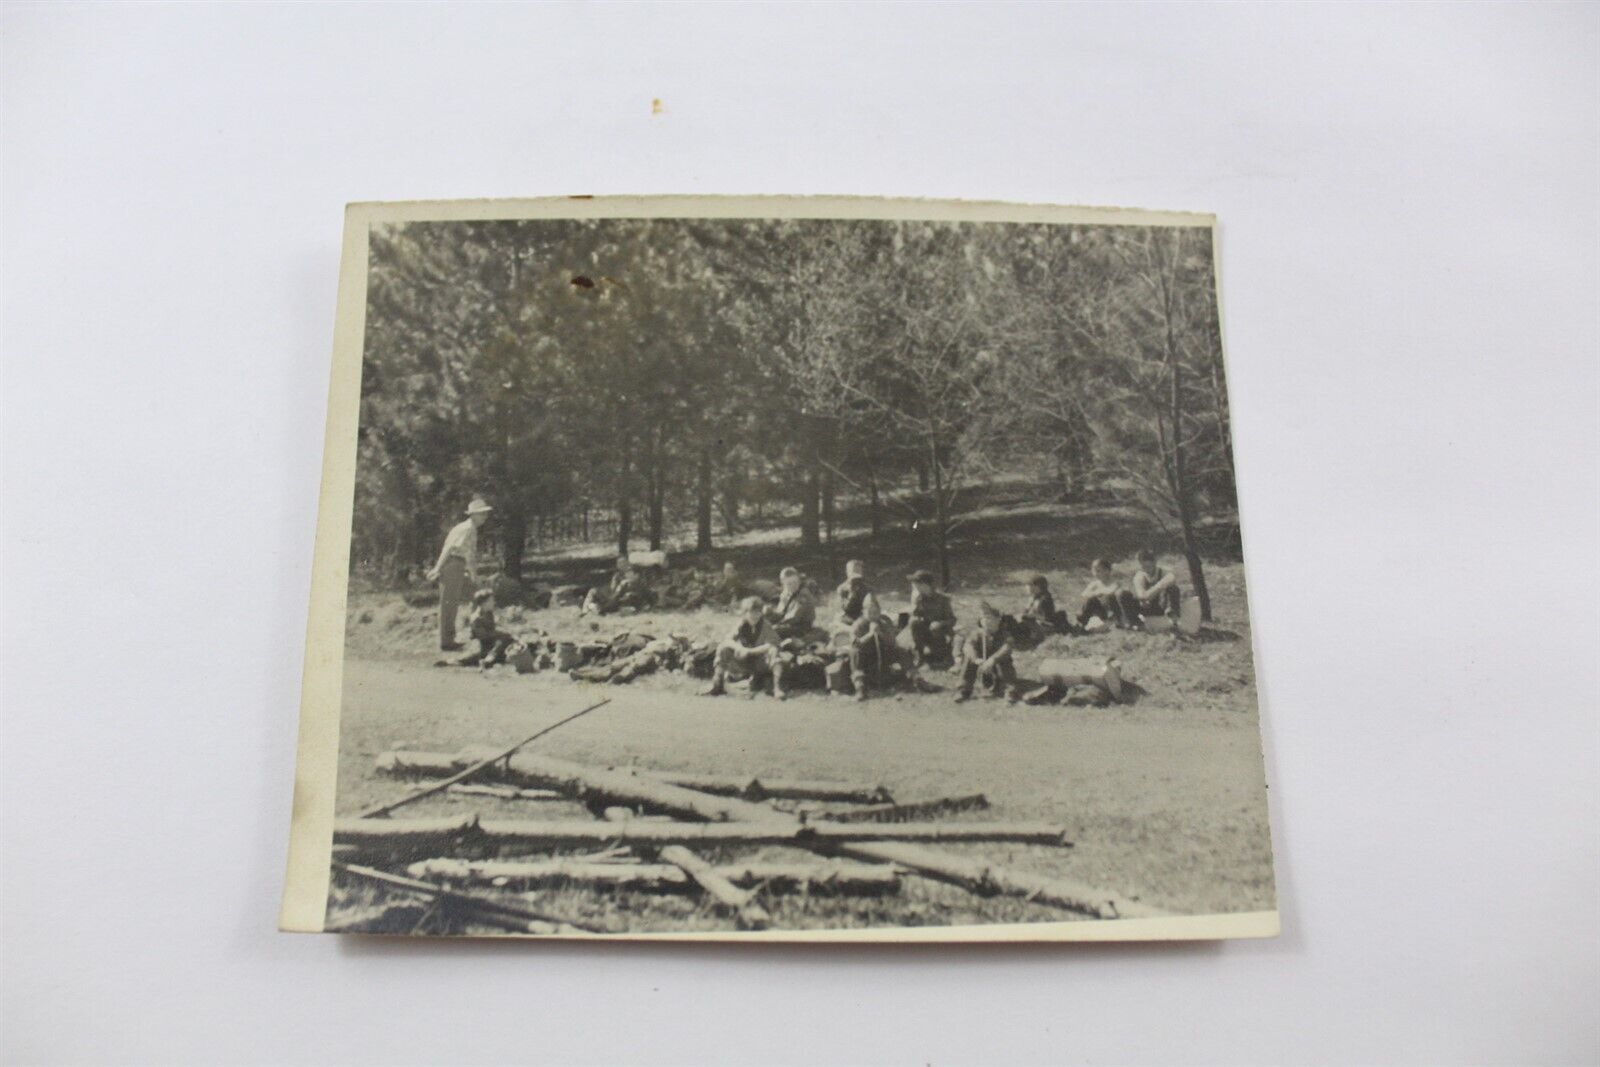   Scouting Picture Ca. 1940's Vintage Collectible